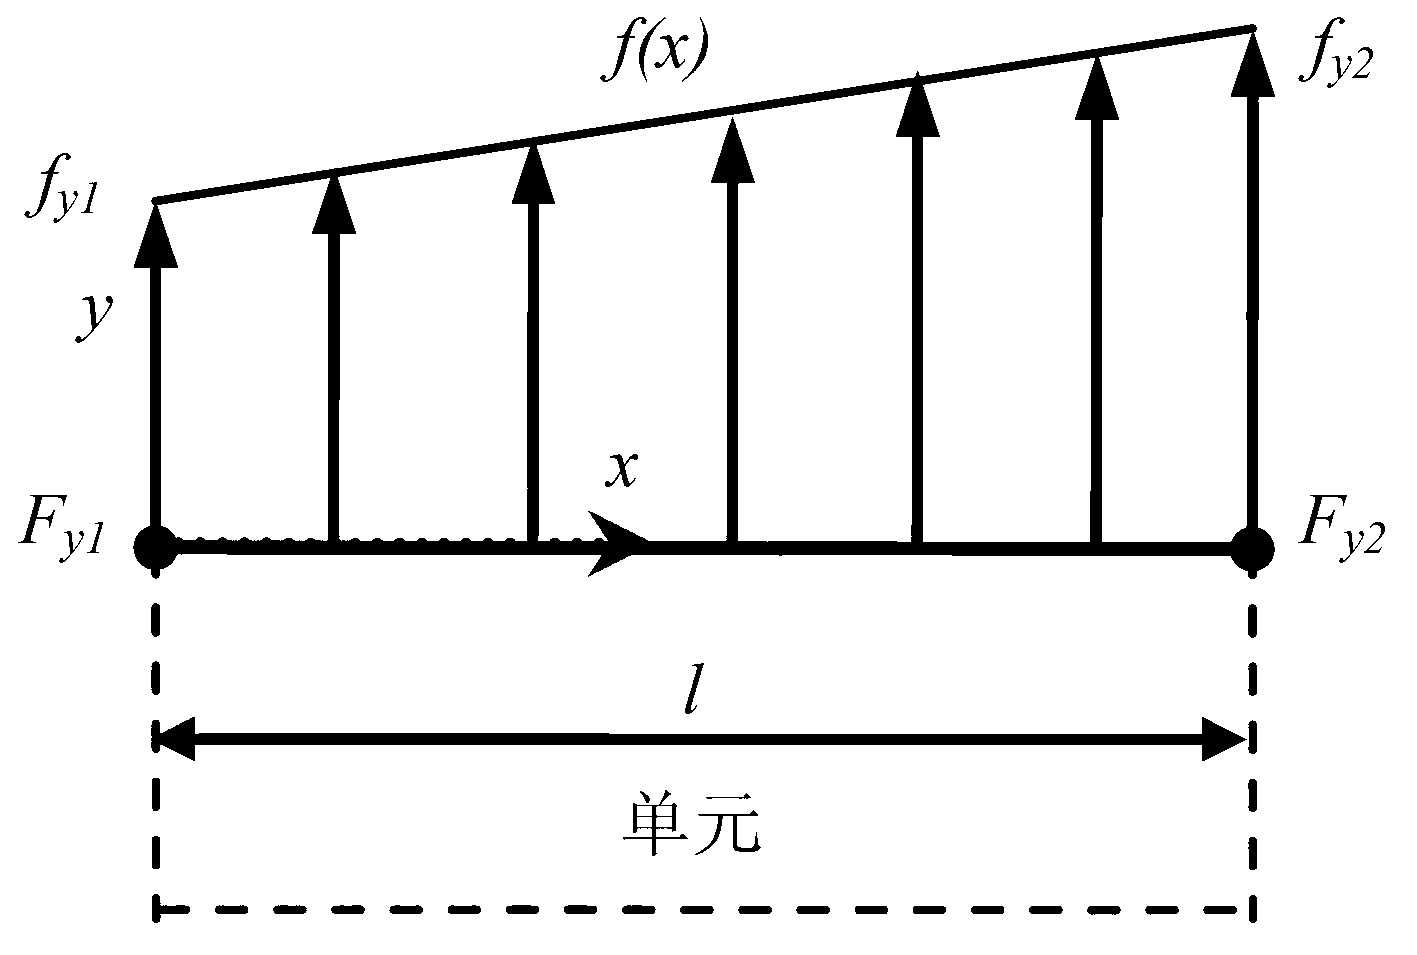 Welding fatigue analyzing method based on a rough set theory